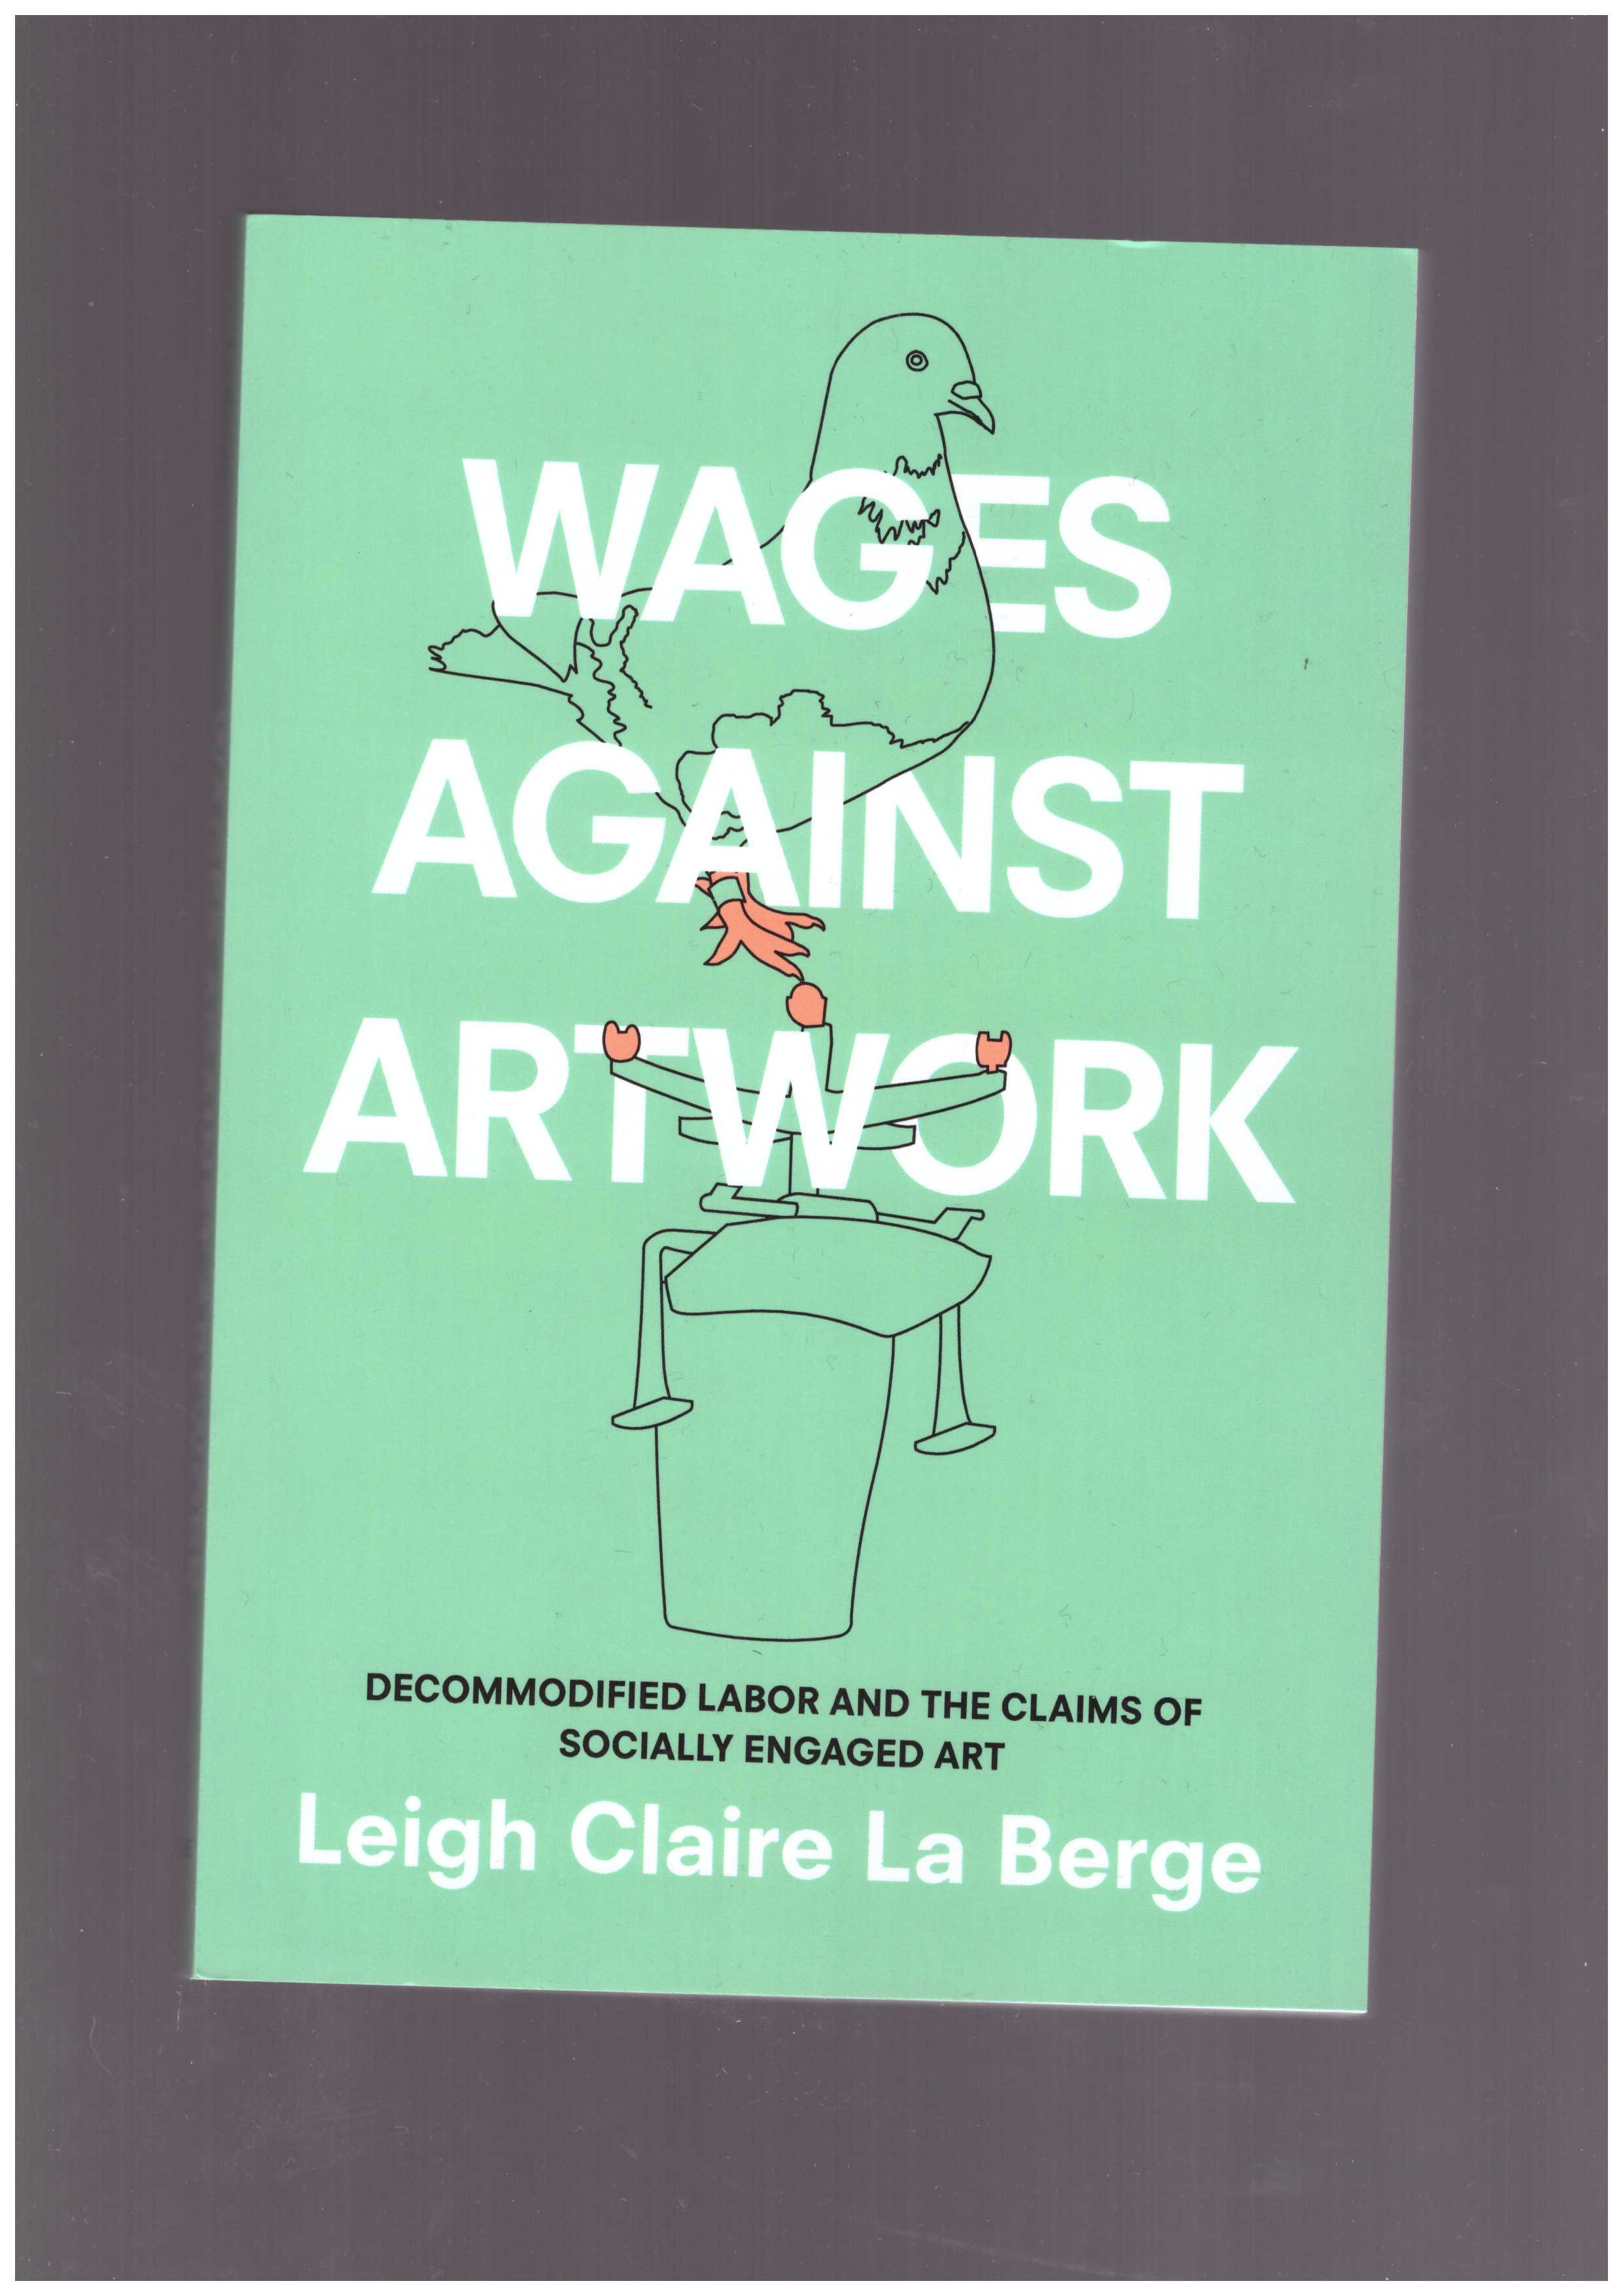 LA BERGE, Leigh Claire - Wages Against Artwork. Decommodified Labor and the Claims of Socially Engaged Art